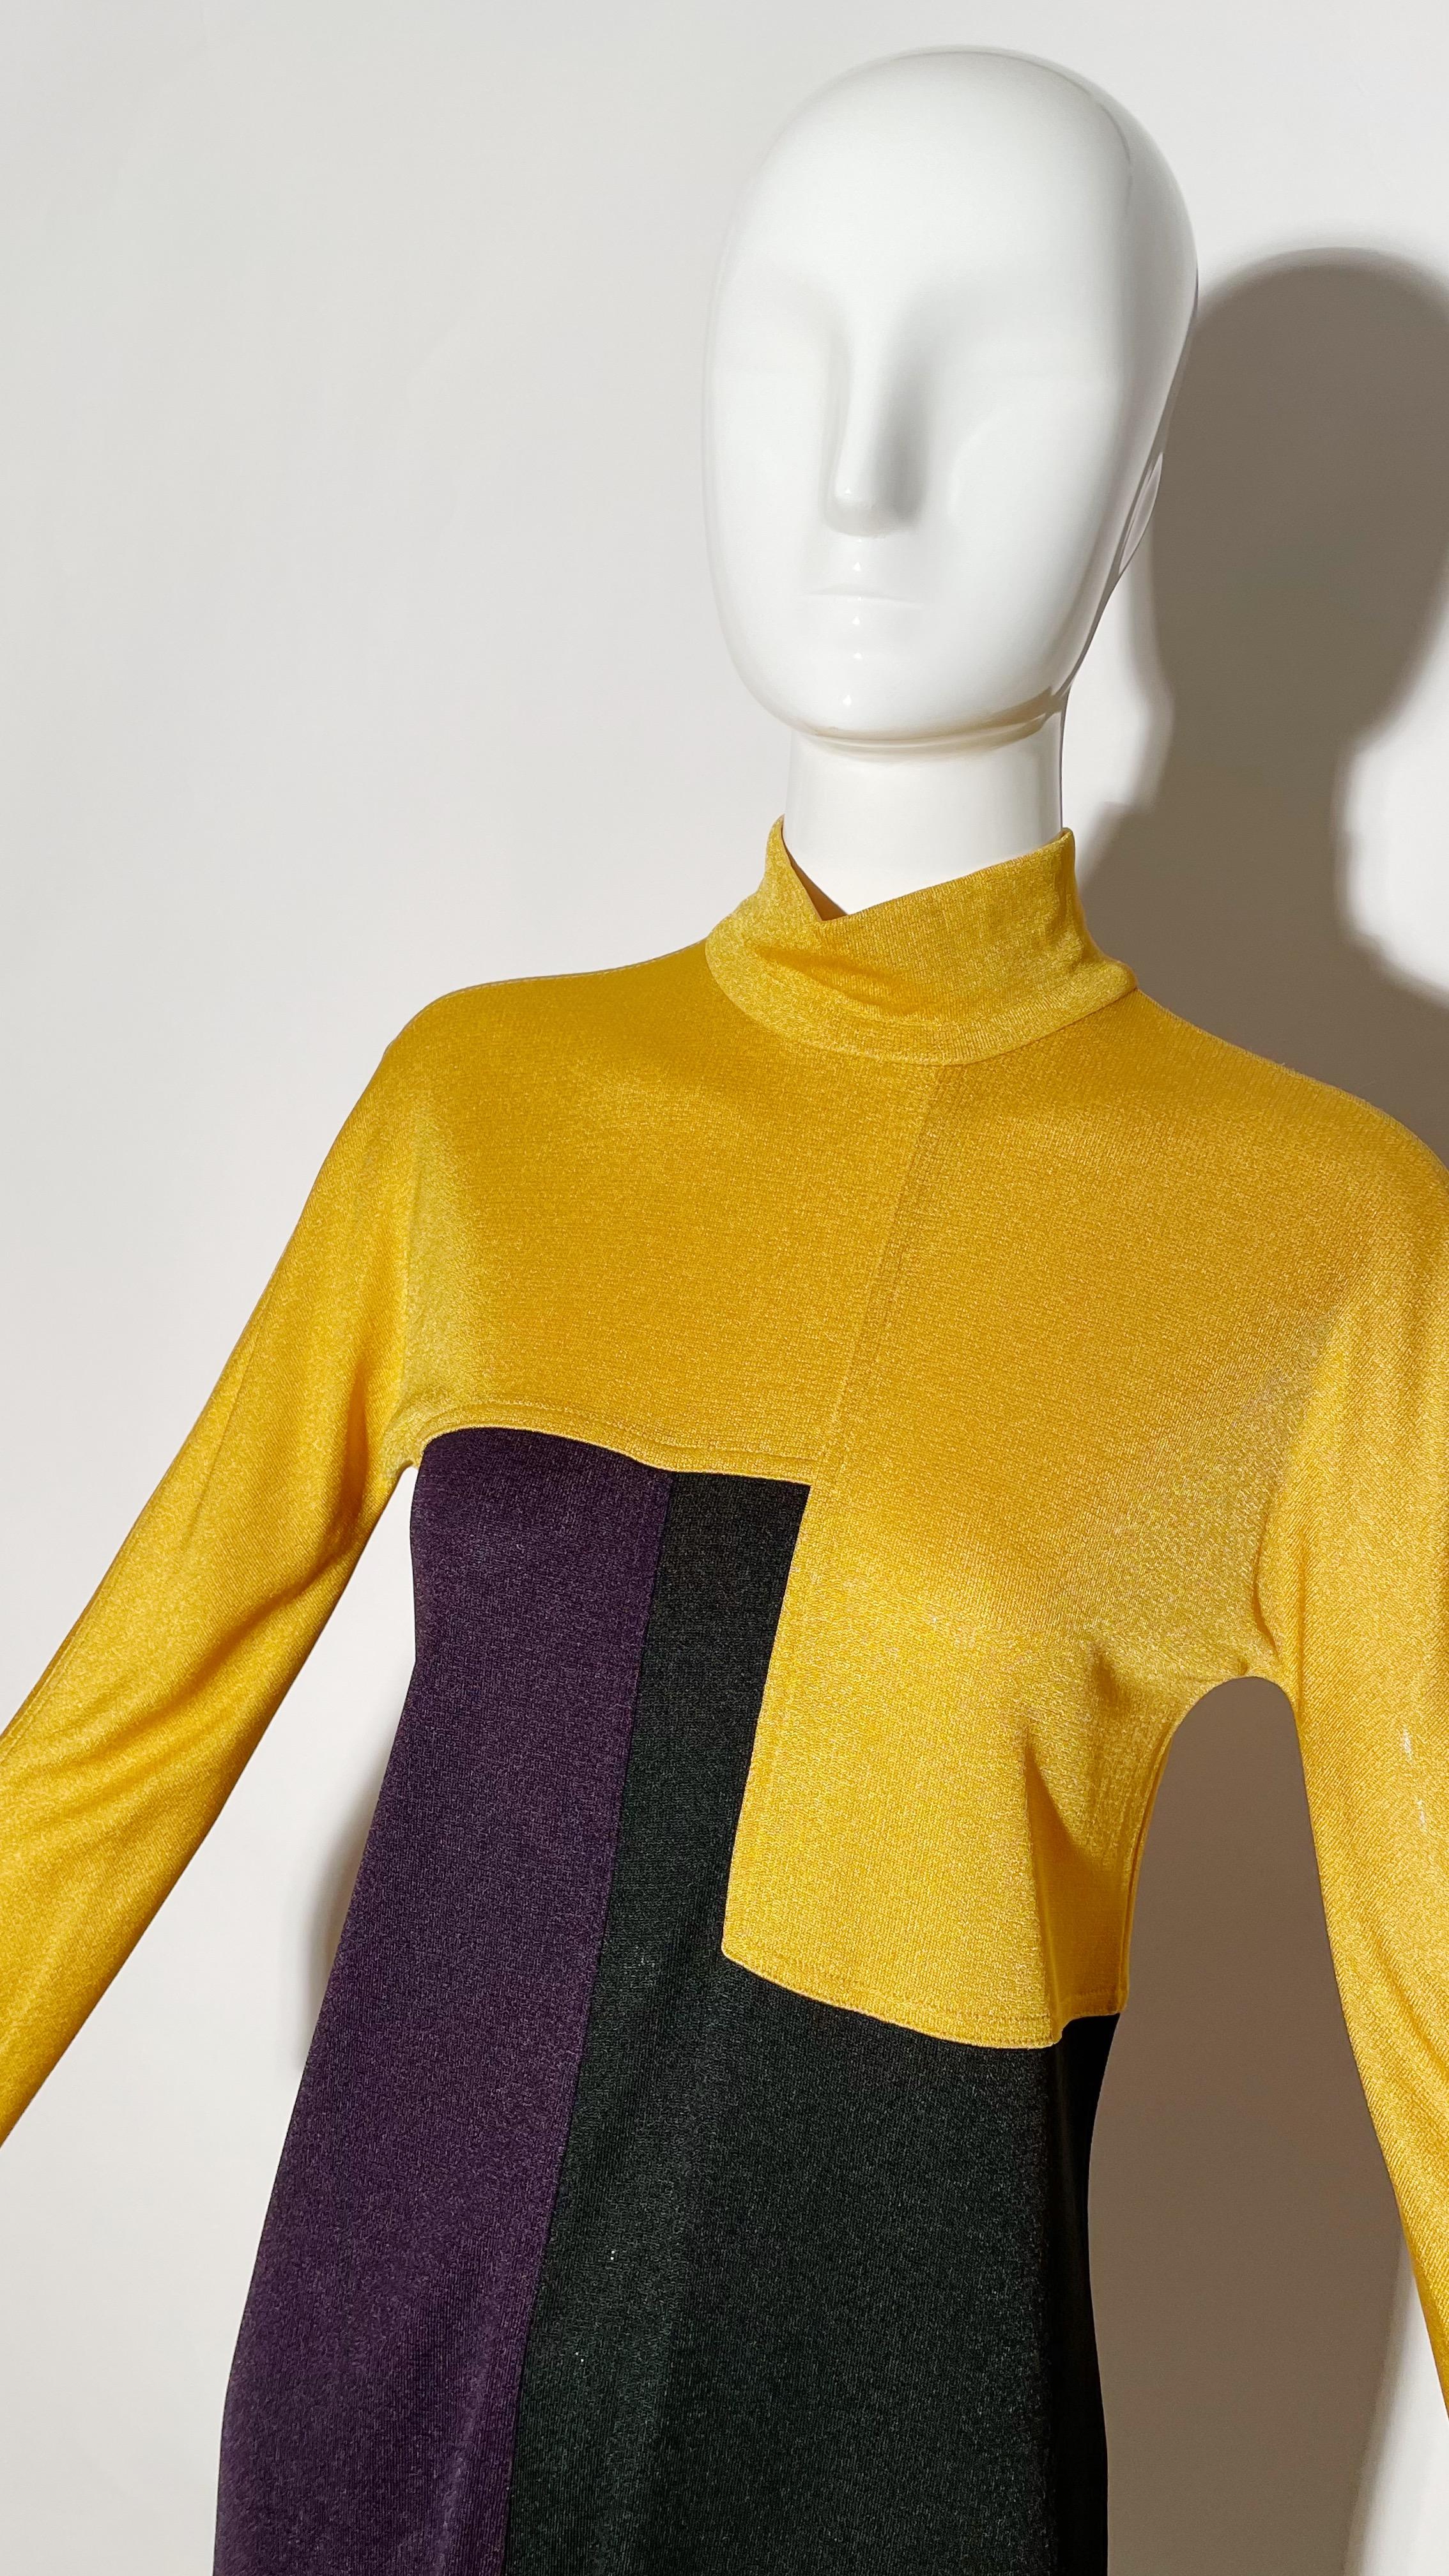 Gianni Versace Knit Colorblock Dress In Excellent Condition For Sale In Los Angeles, CA